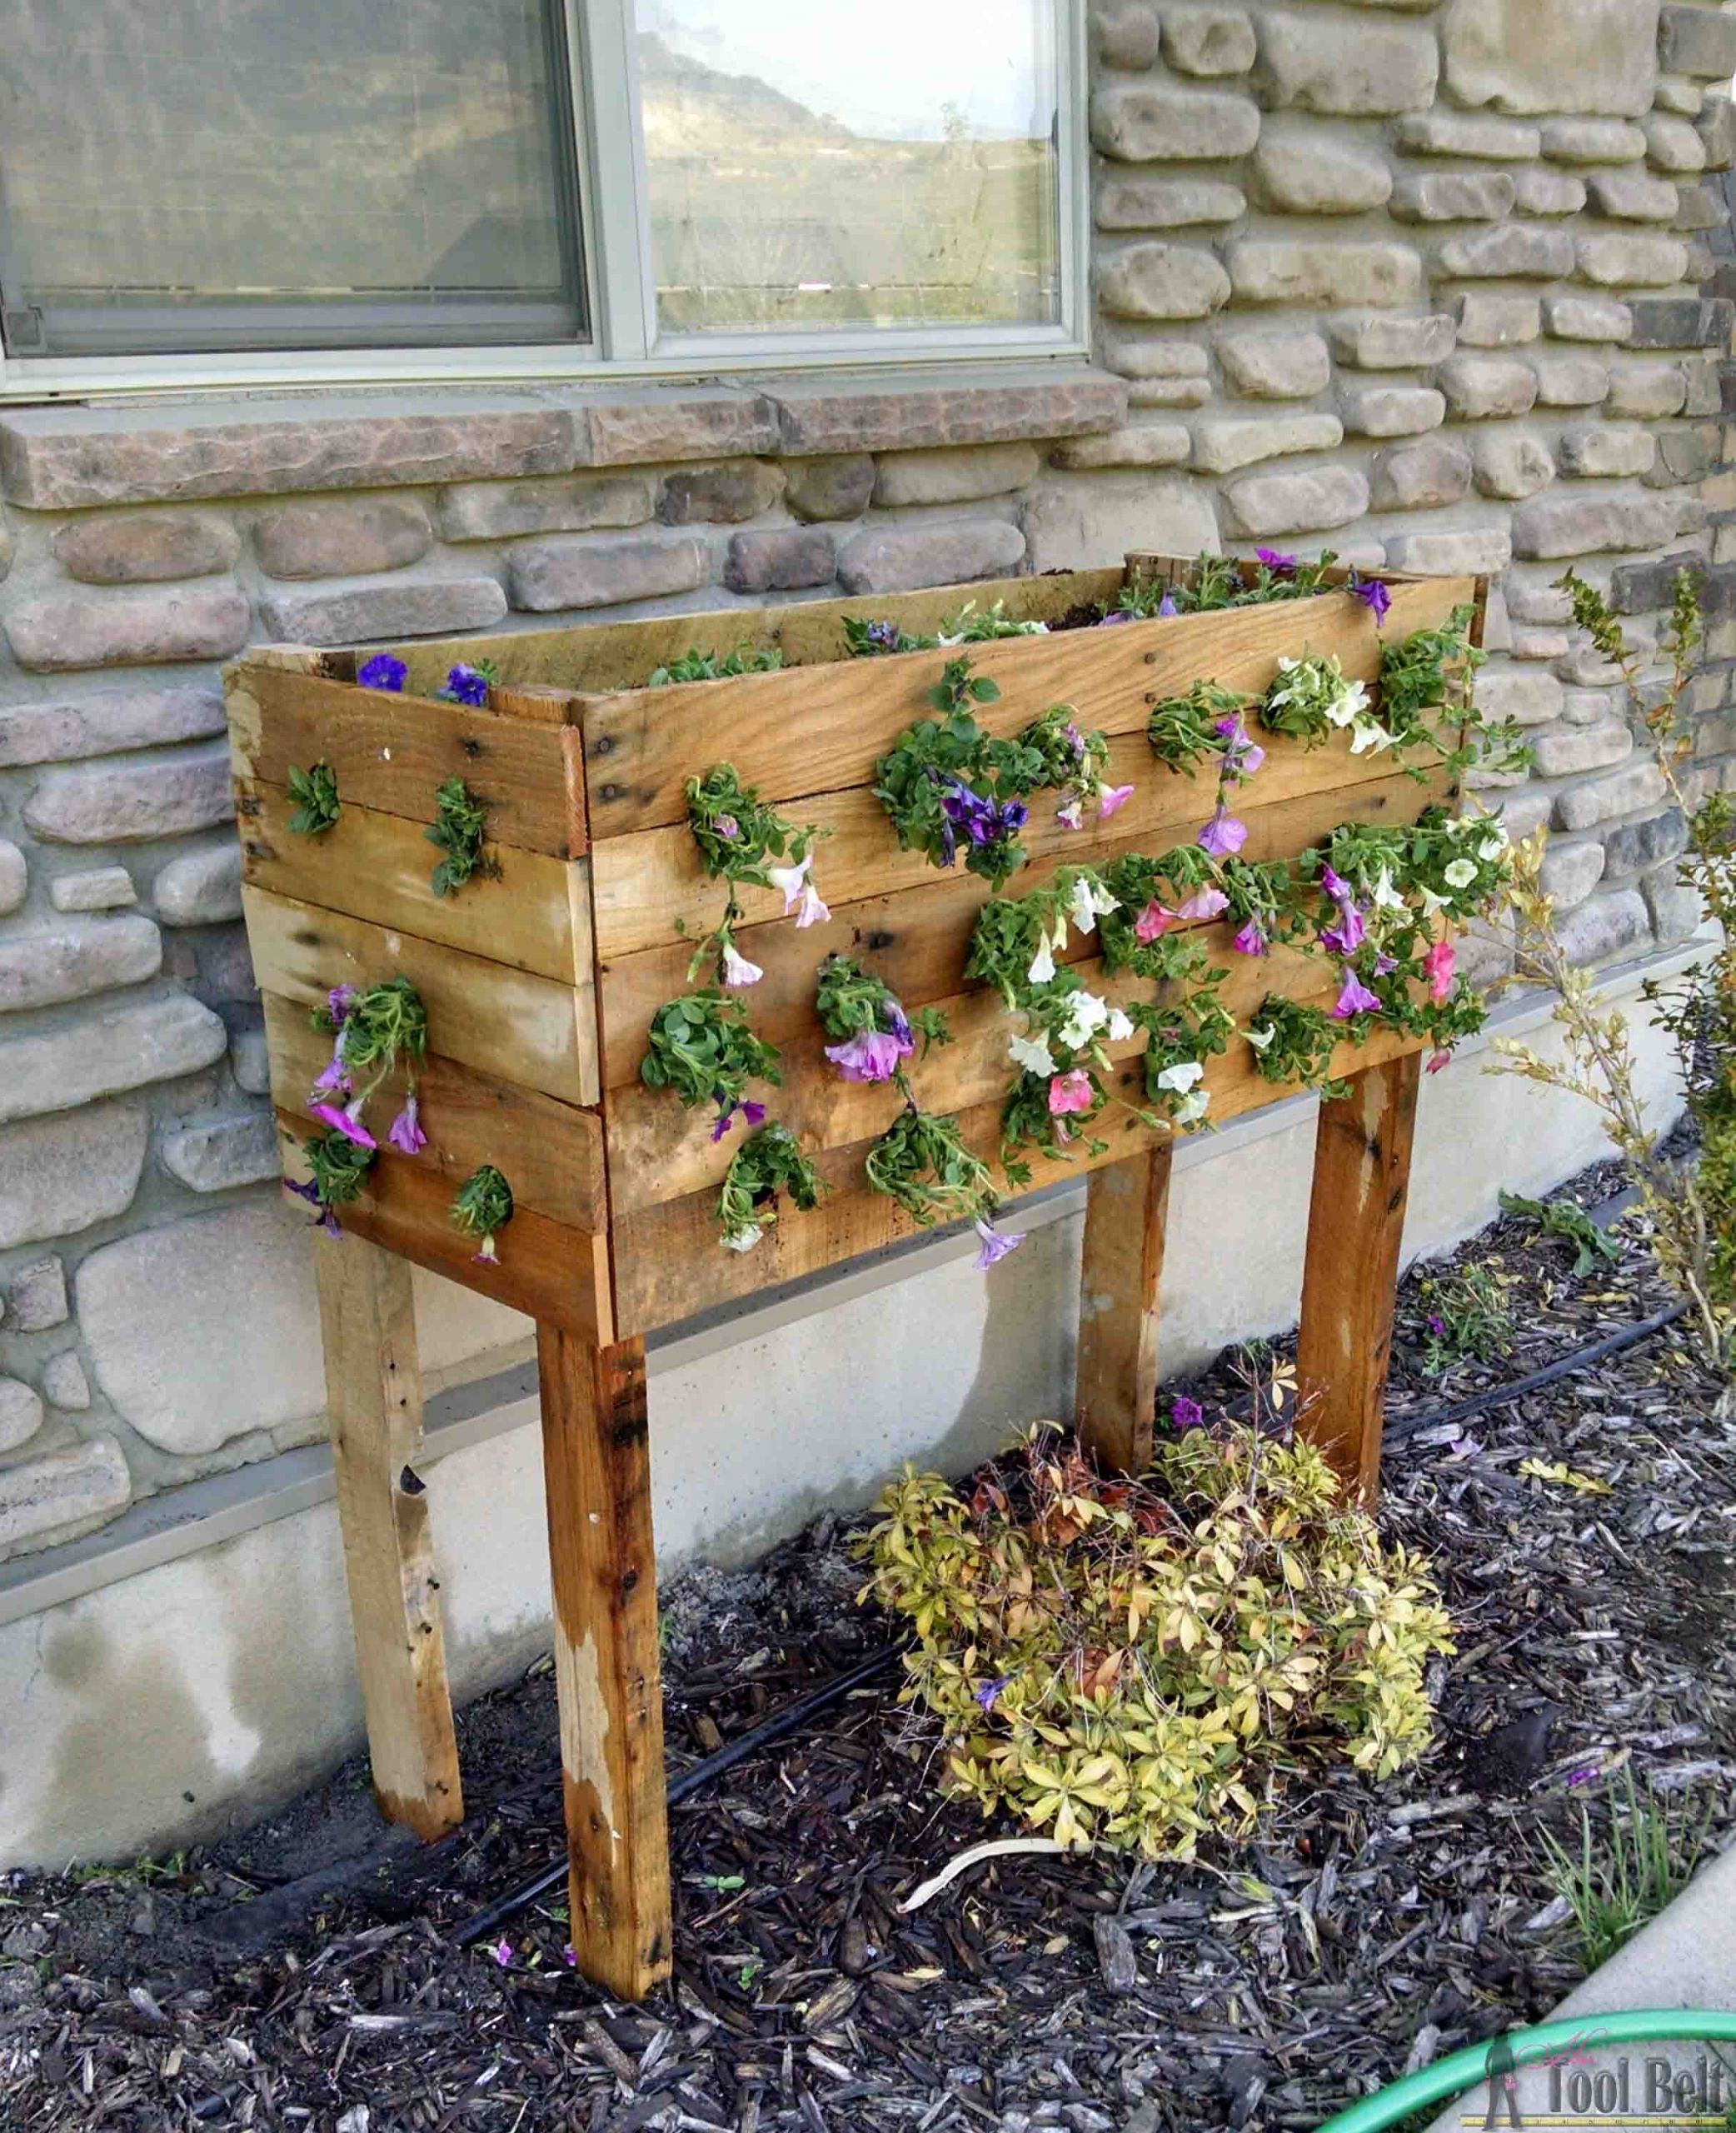 DIY Large Planter Boxes
 37 Outstanding DIY Planter Box Plans Designs and Ideas